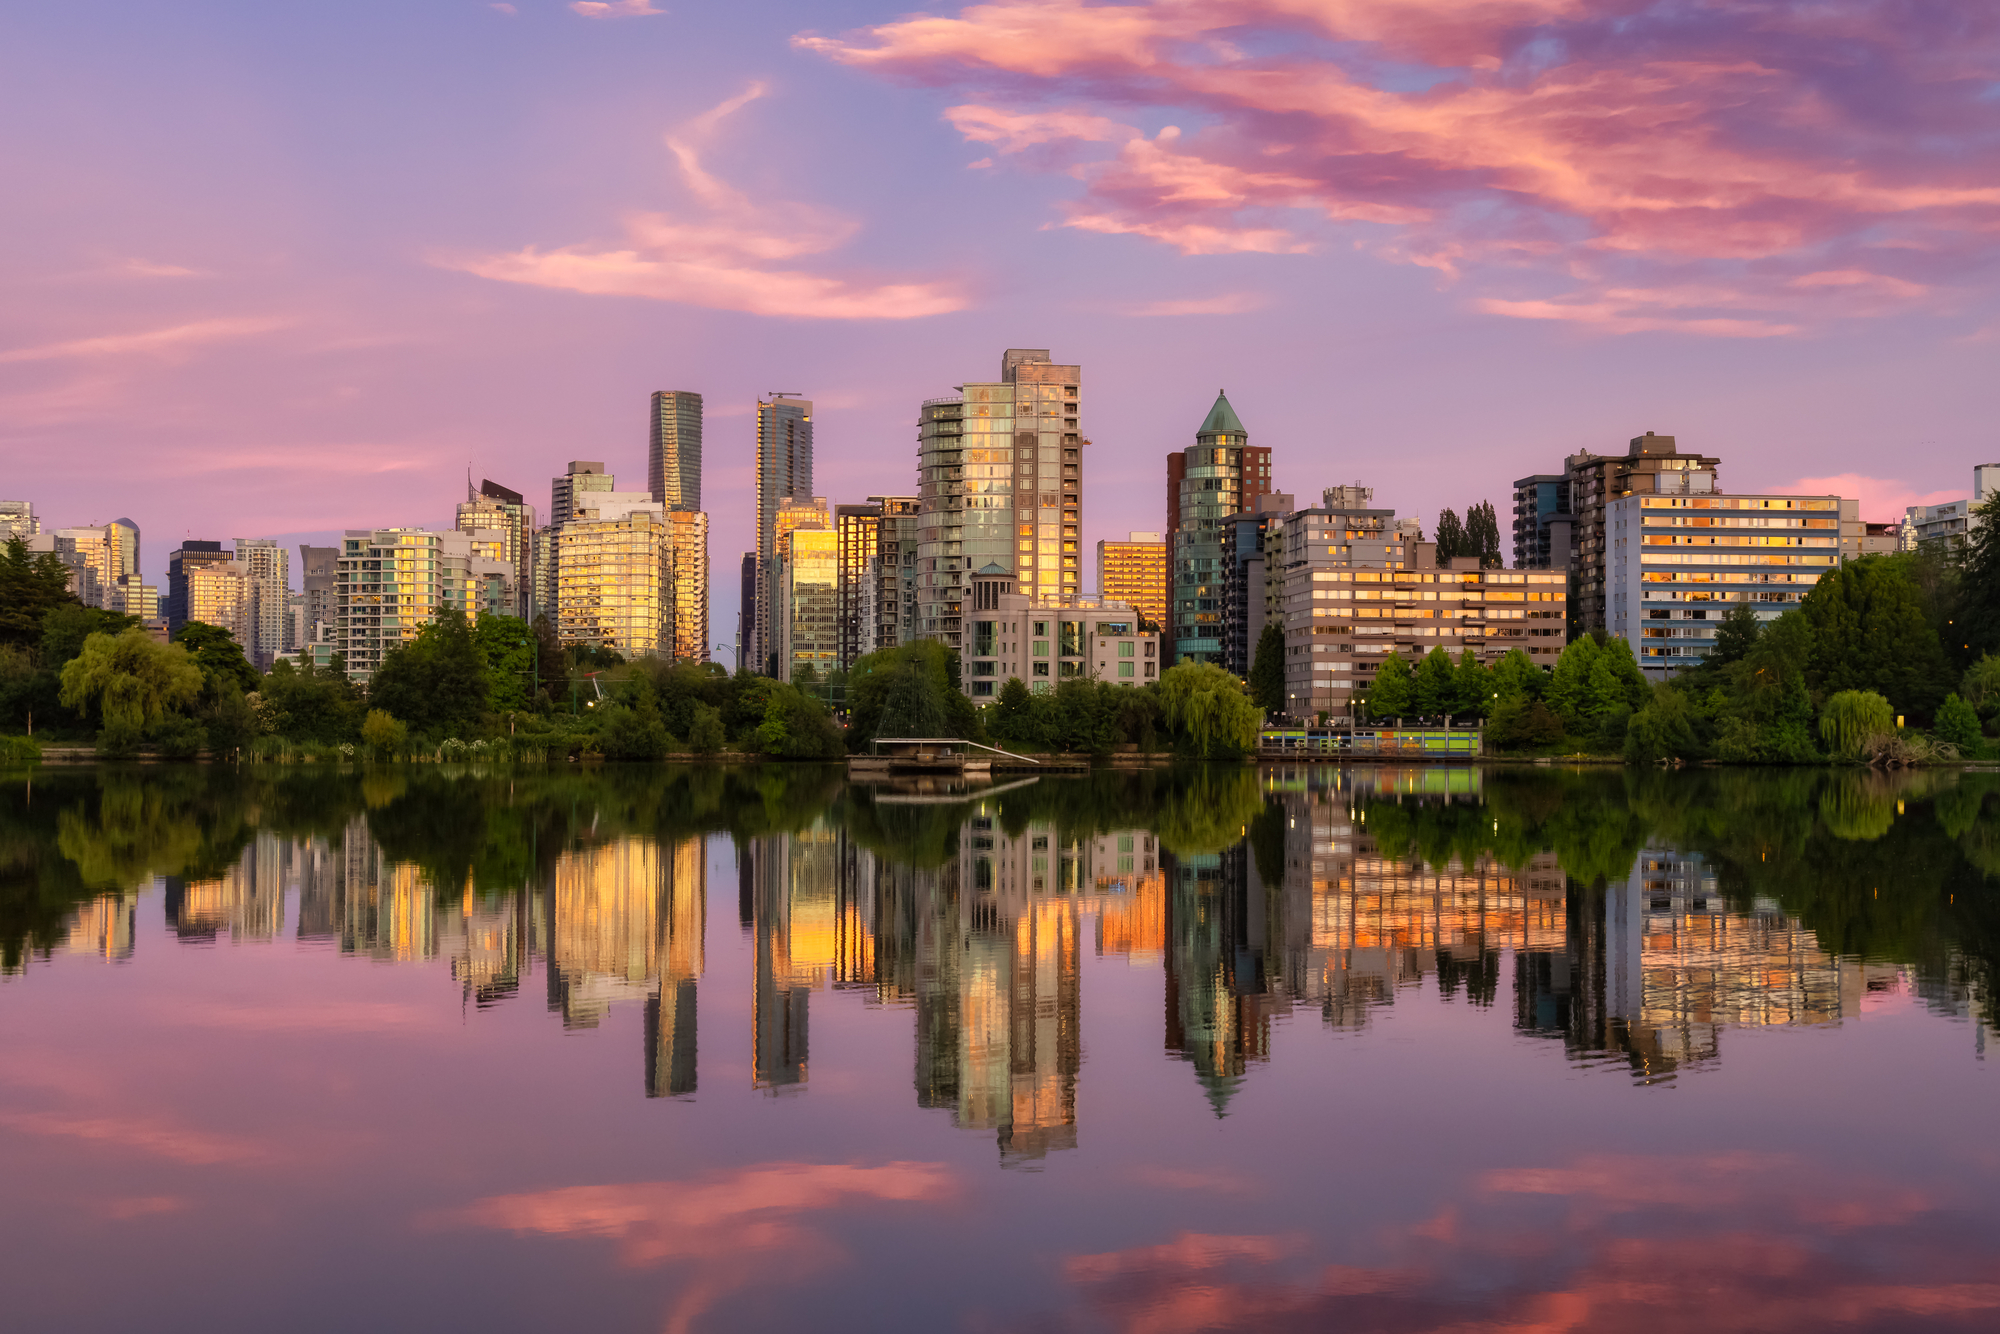 View of Lost Lagoon in famous Stanley Park in a modern city with buildings skyline